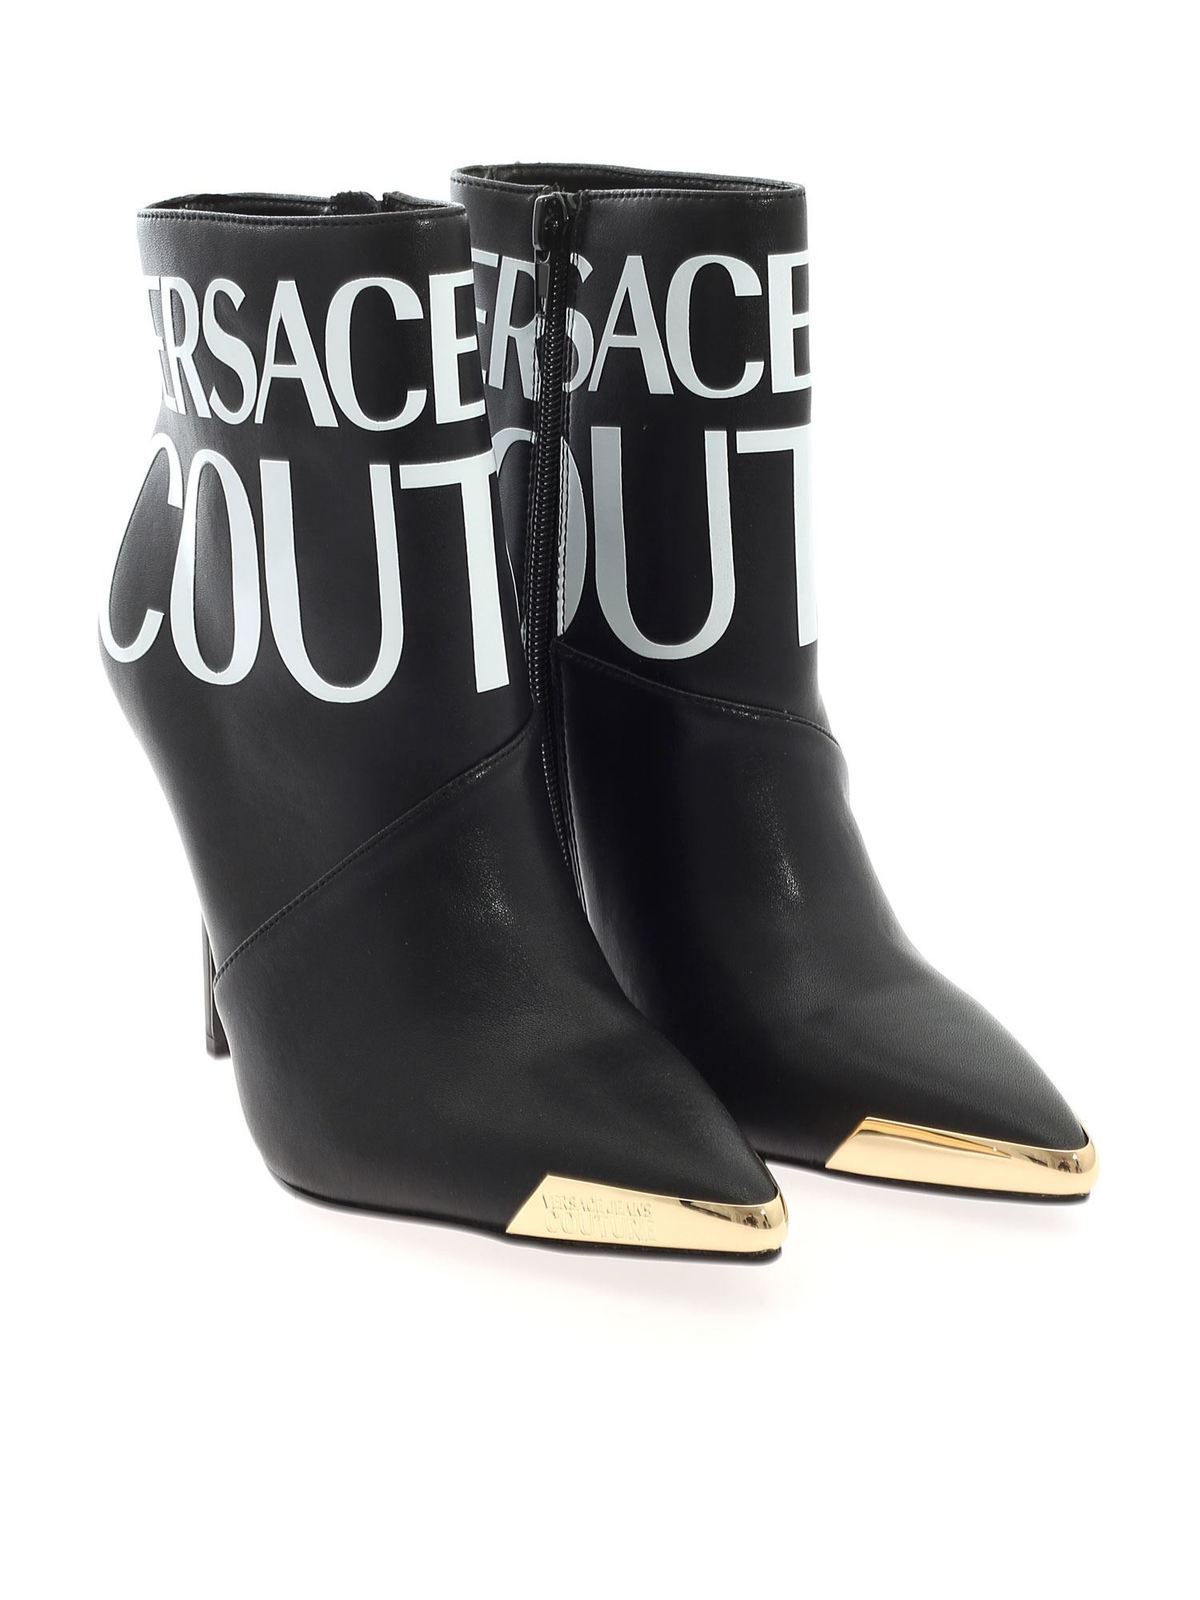 versace couture boots